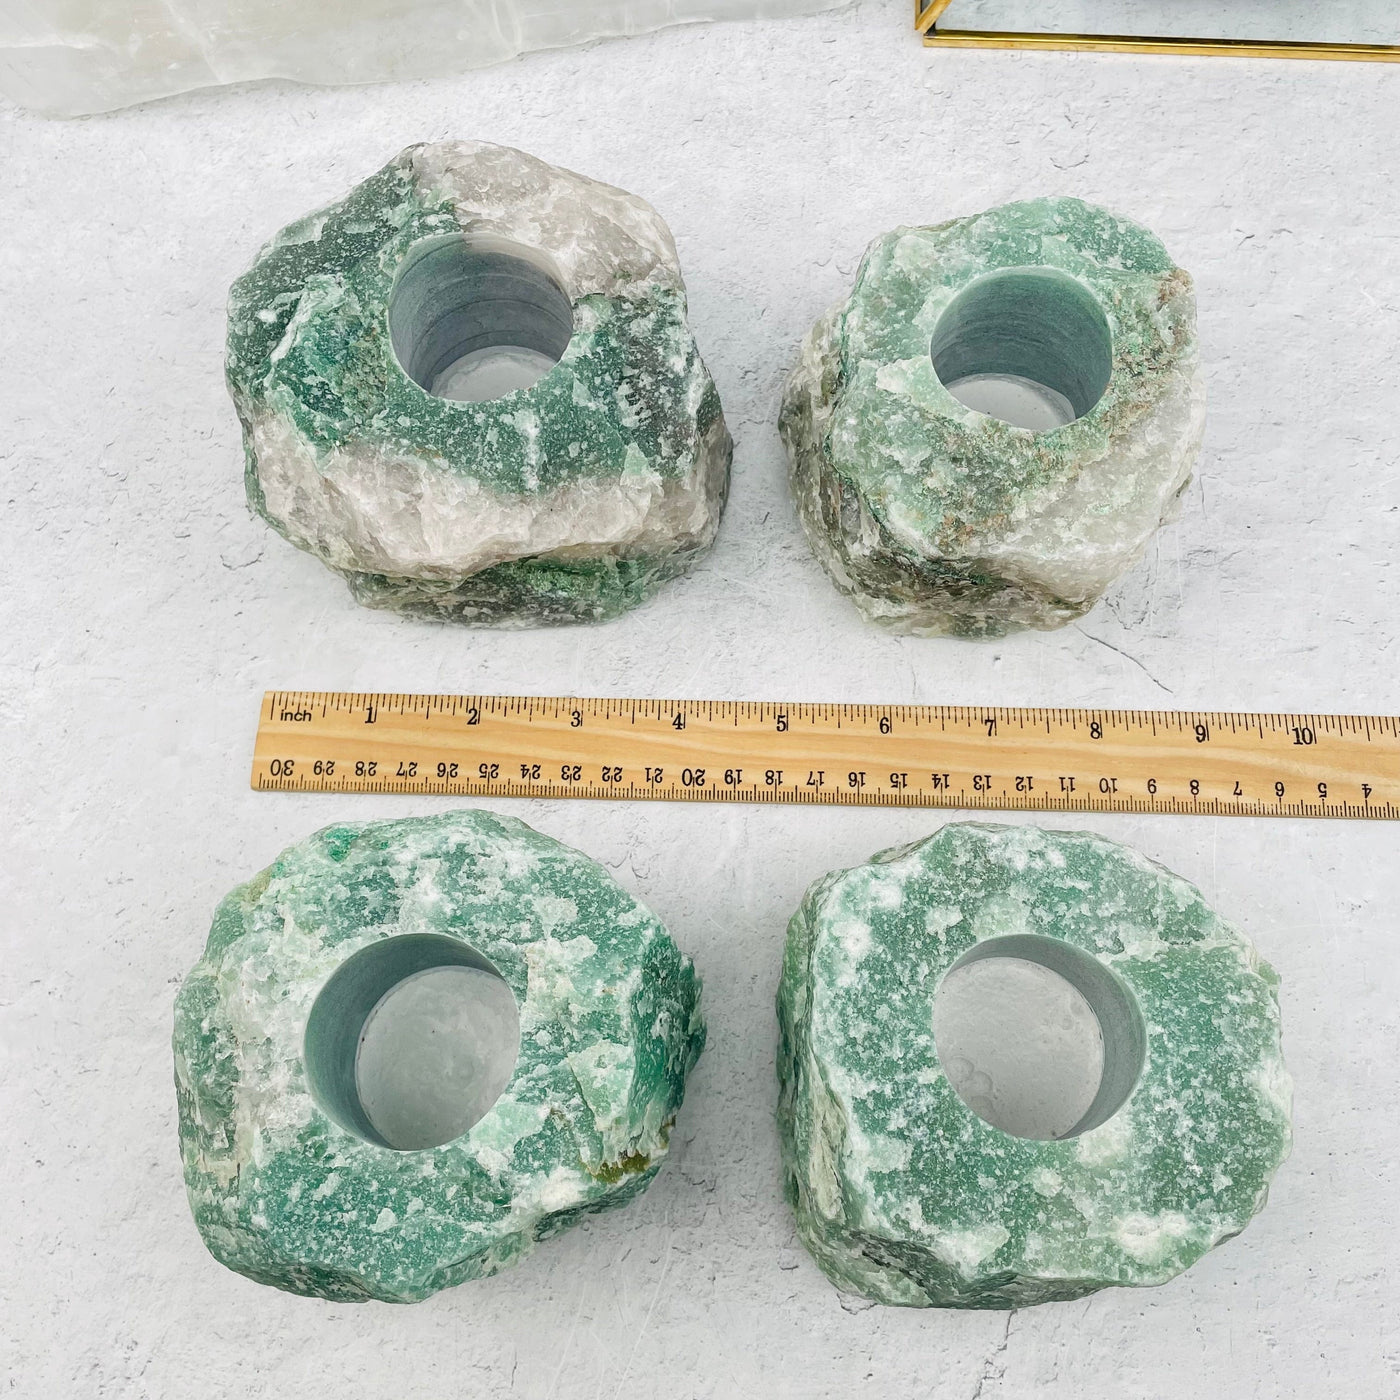 Green Quartz Candle Holders next to a ruler for size reference 